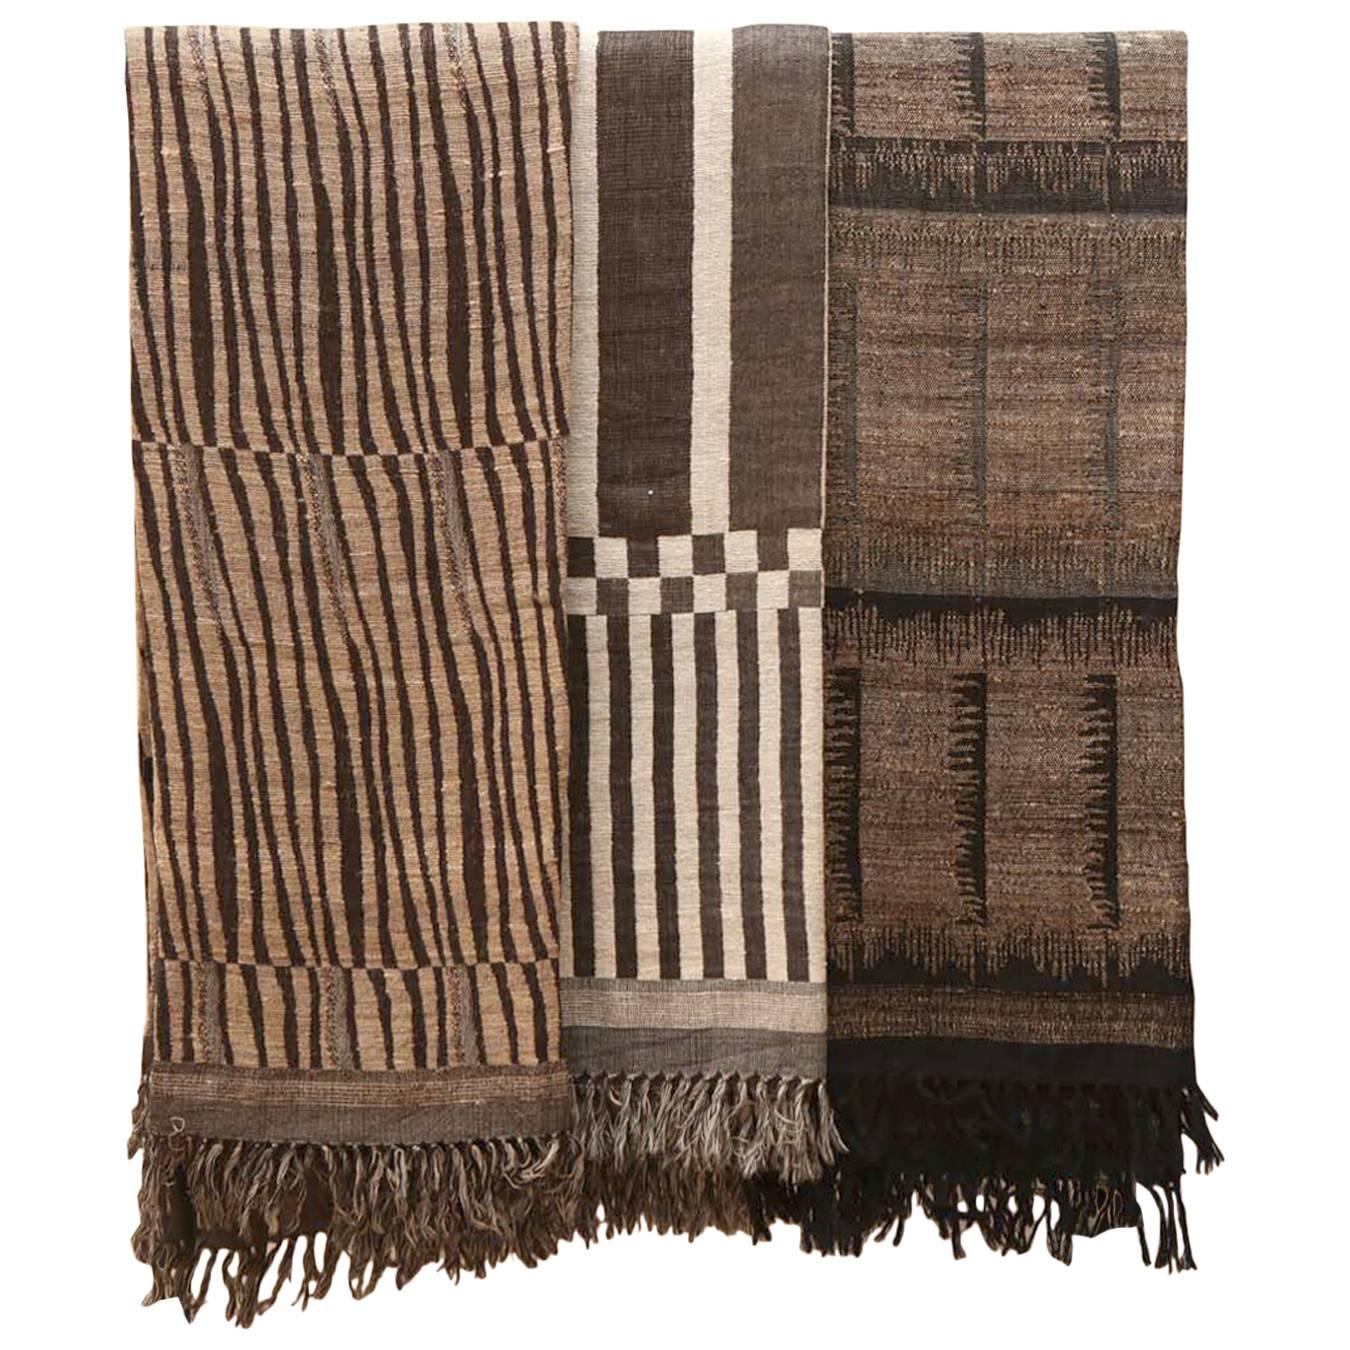 Indian Hand Woven Throws.  Browns, Blacks, Grays and White.  Wool and Raw Silk.  For Sale